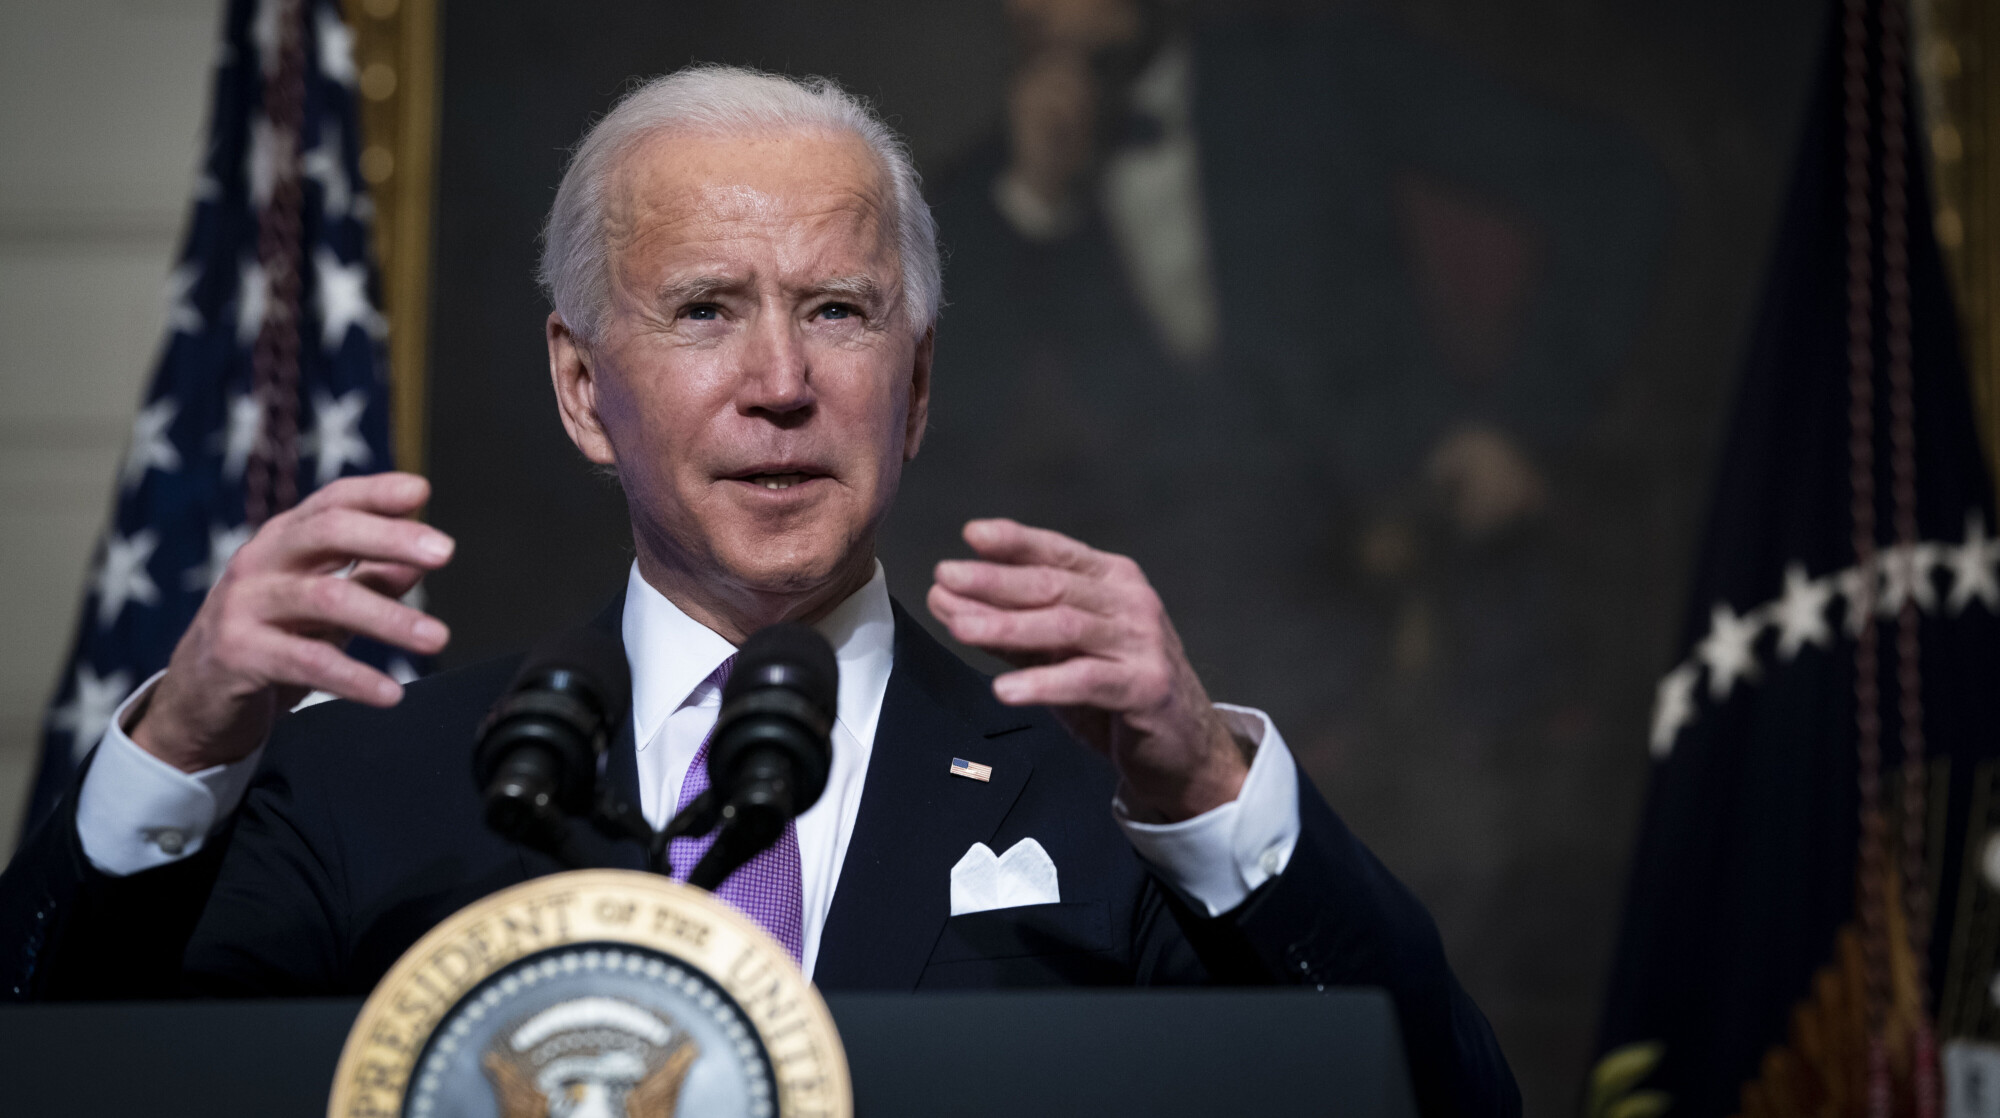 Biden Says Wait for Investigation in First Comments on Cuomo’s Sexual Misconduct Scandal